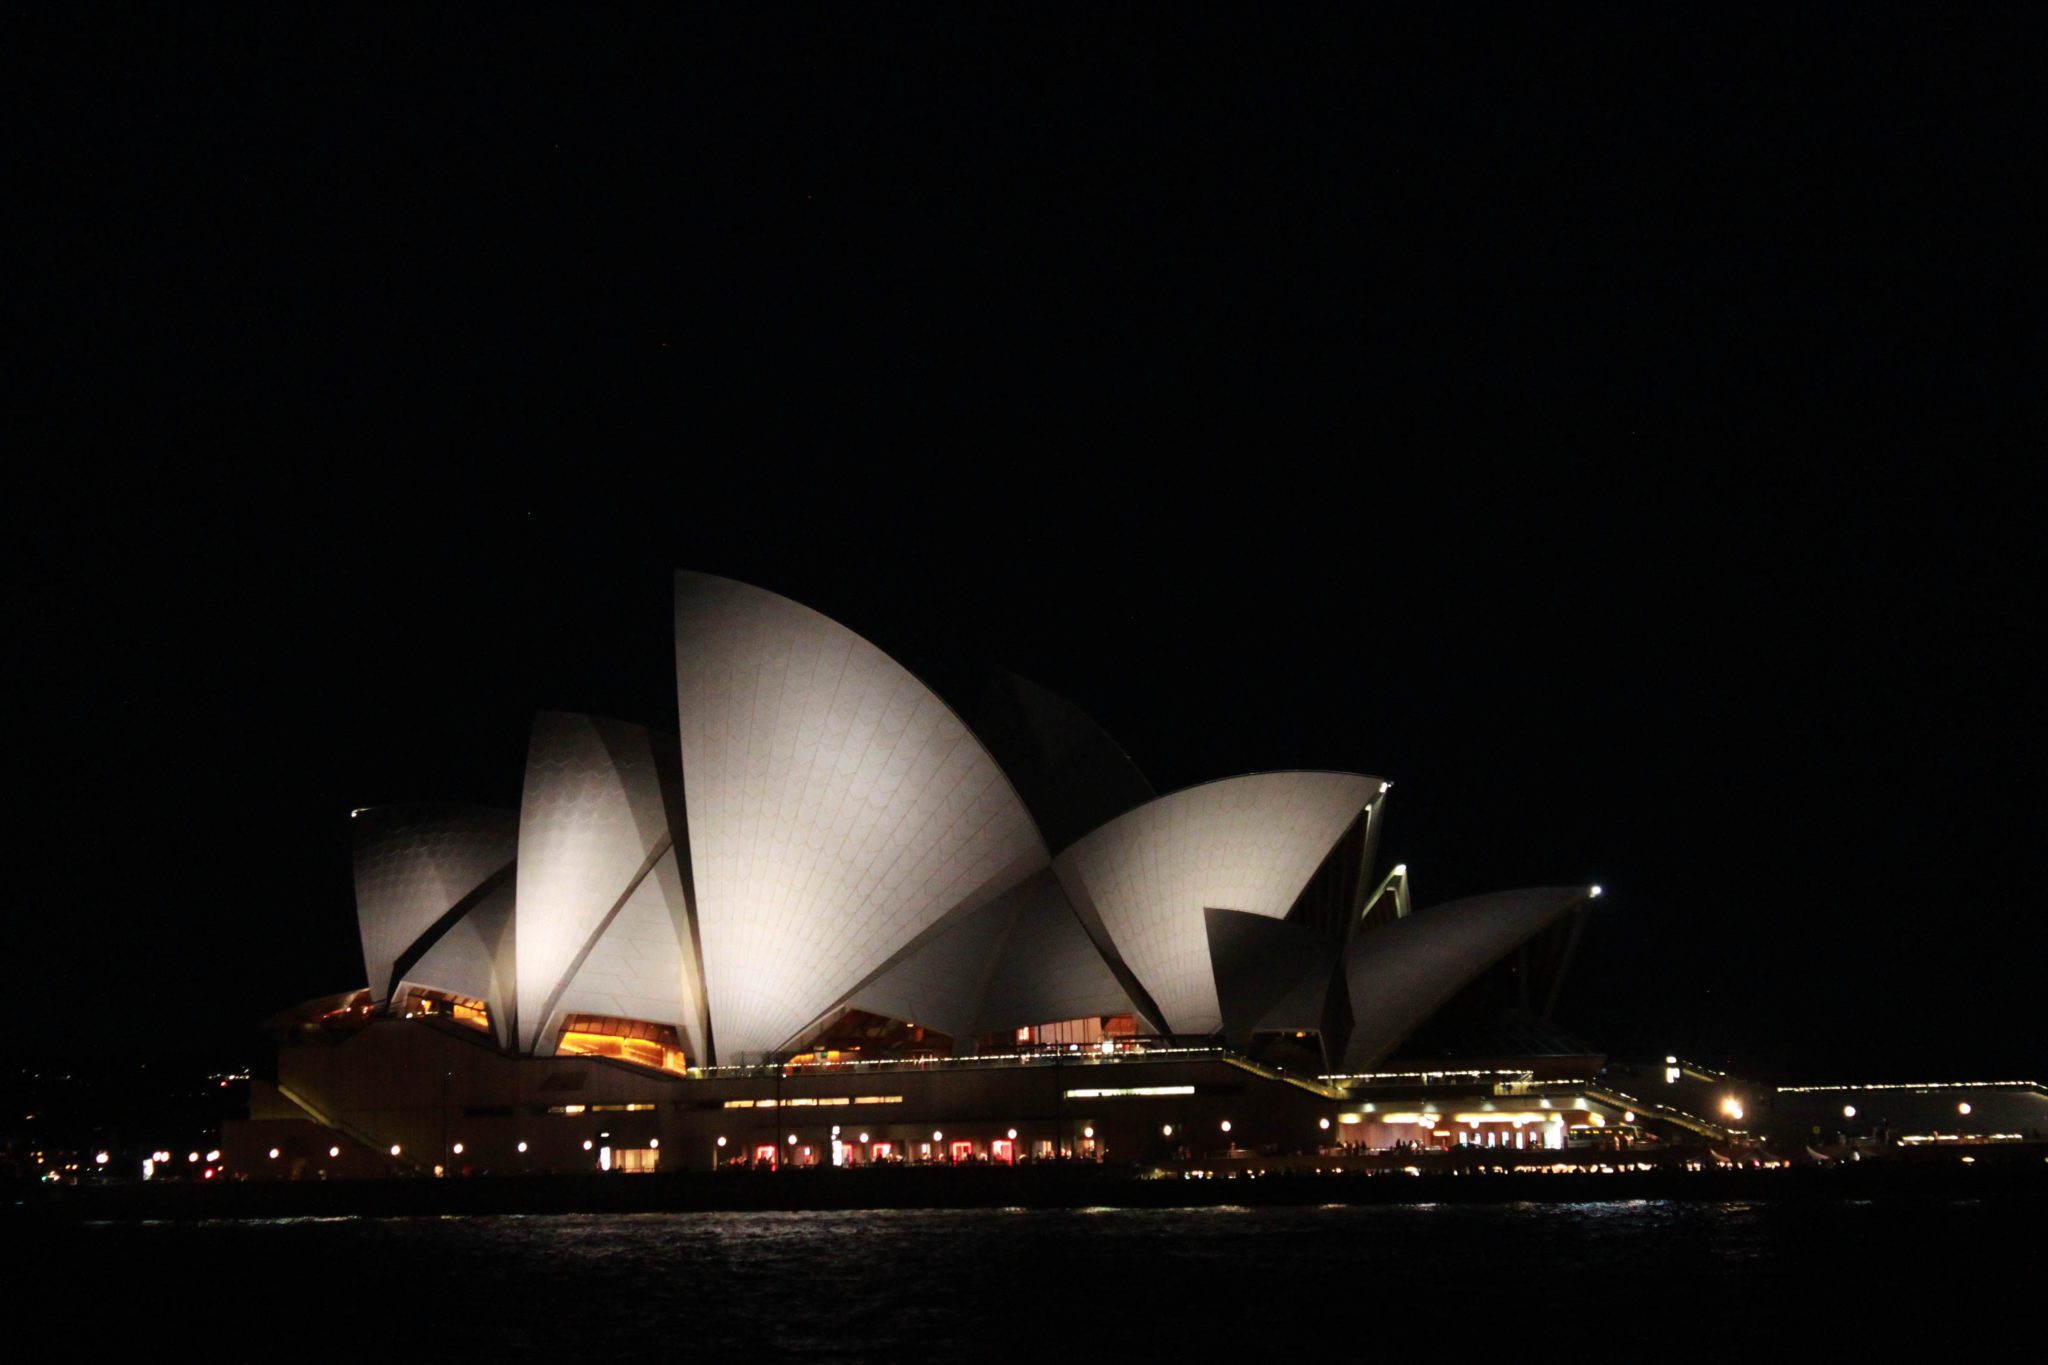 Tips for visiting the Sydney Opera House- Top 10 things to do in Sydney #sydney #australia #sydneyoperahouse #simplywander